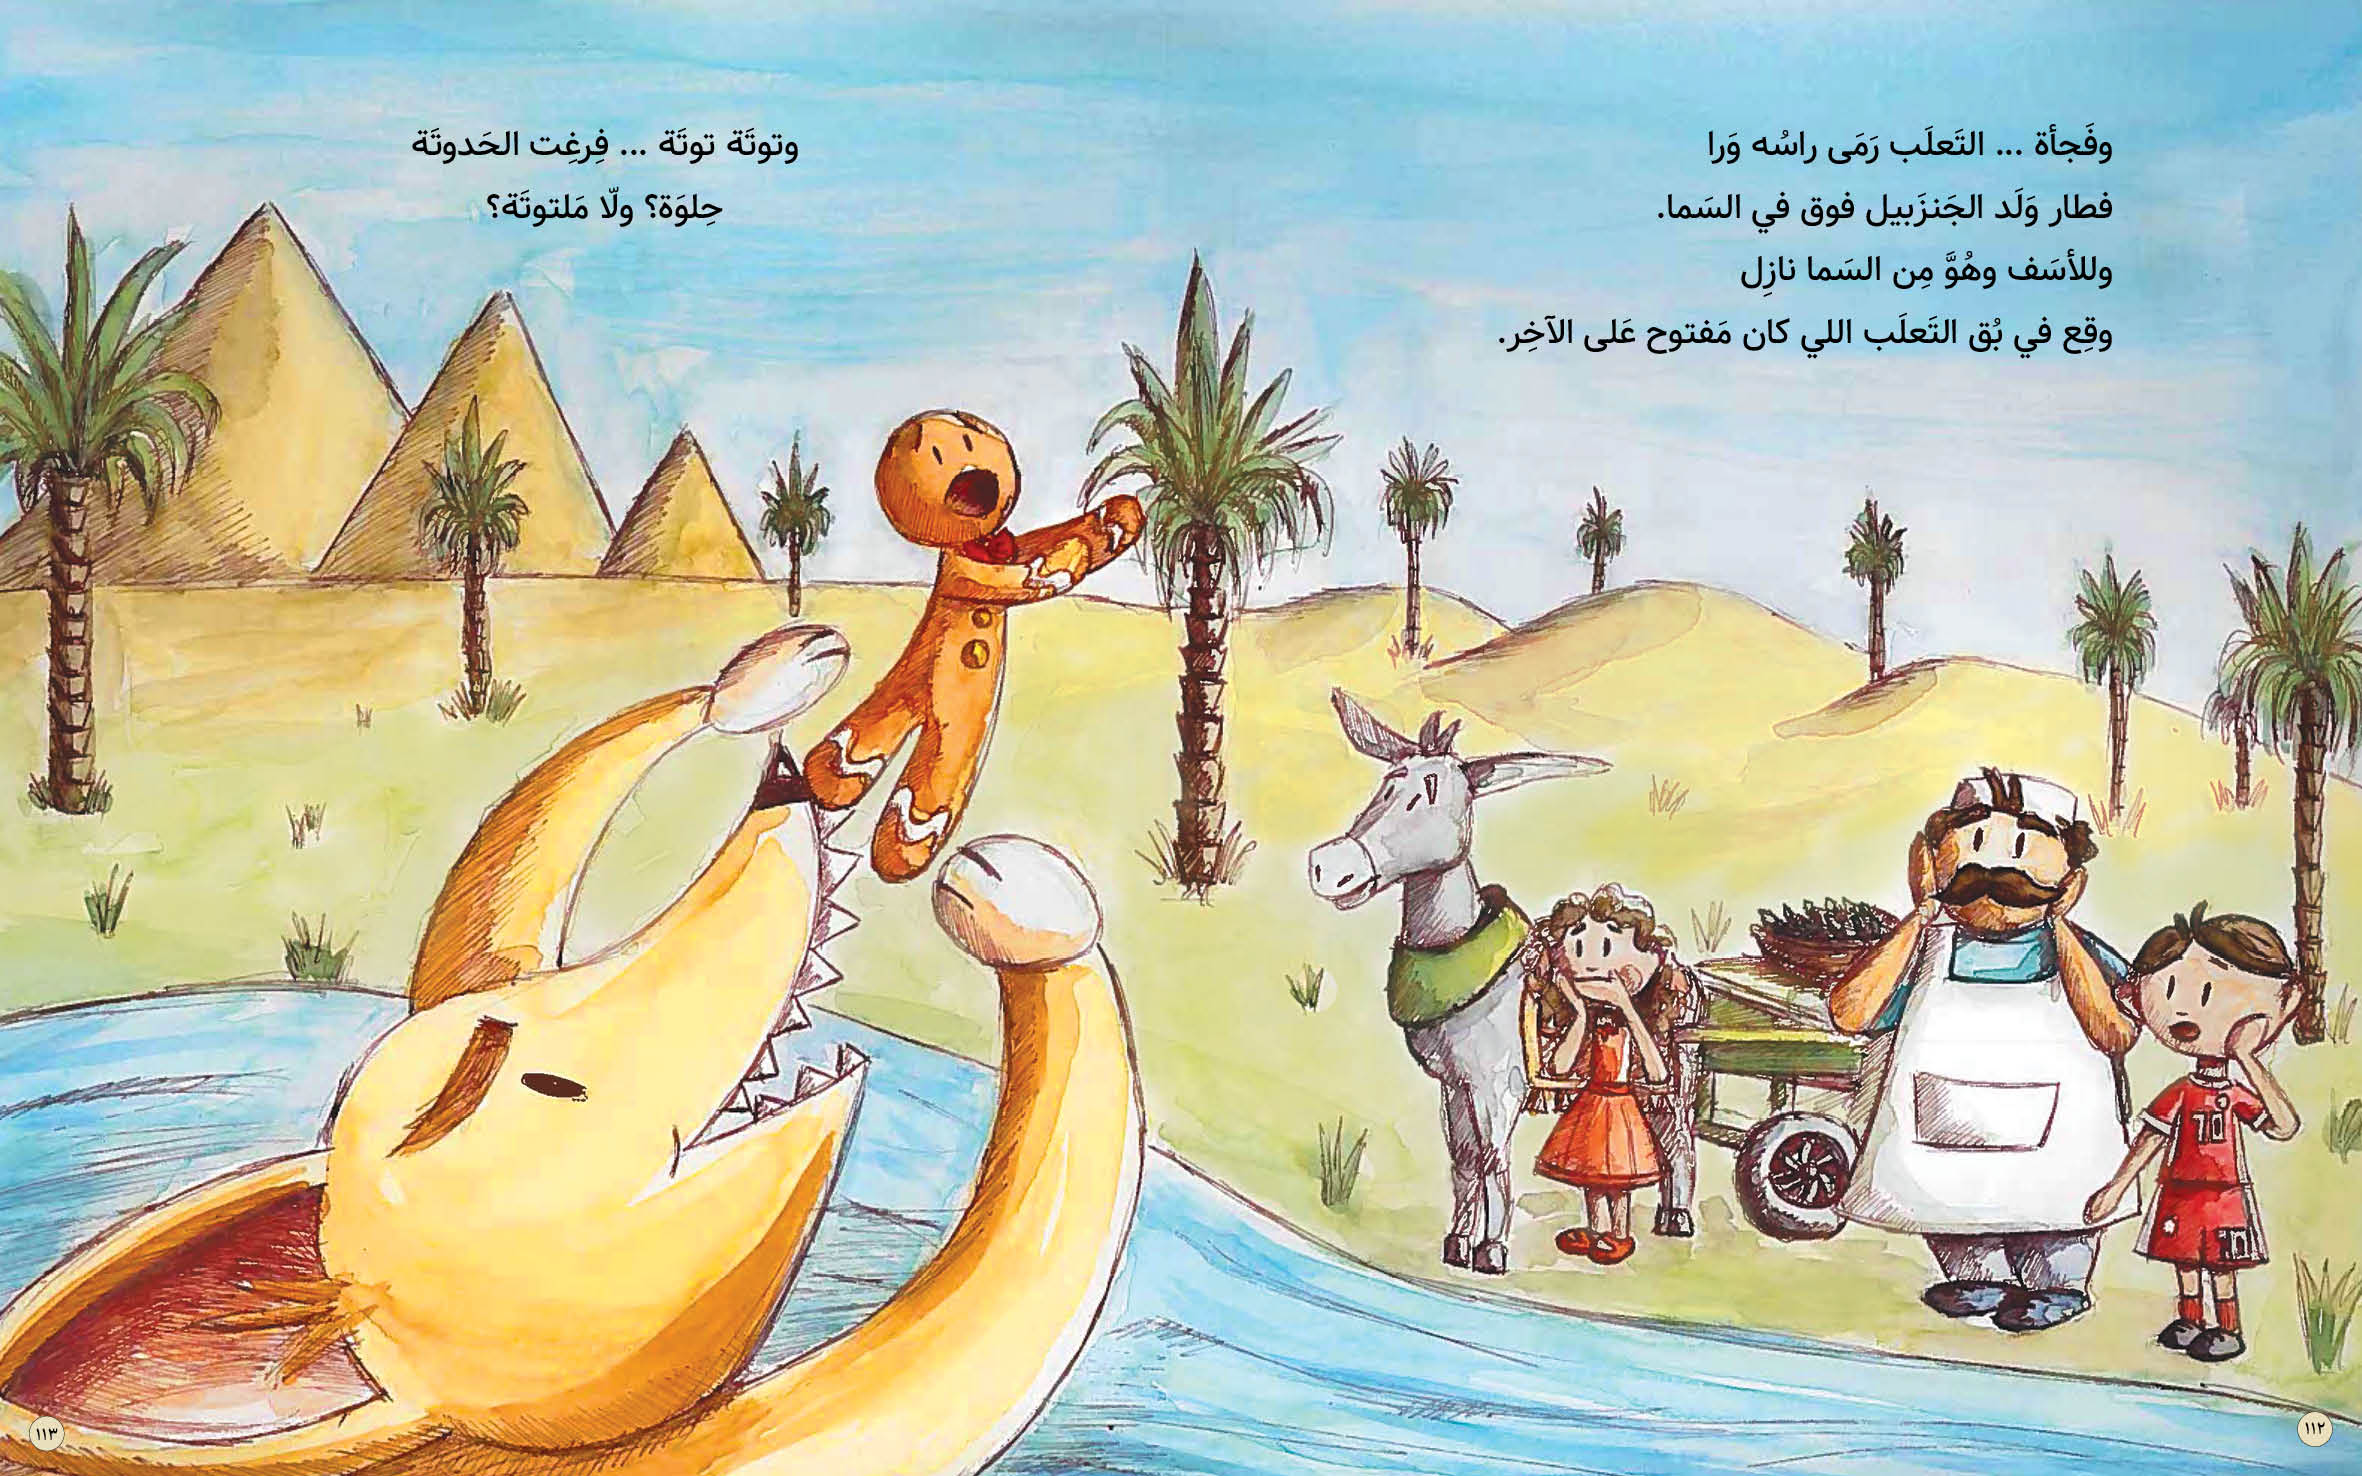 Shendy's version of "The Gingerbread Man" is set in Cairo (Illustrated by)